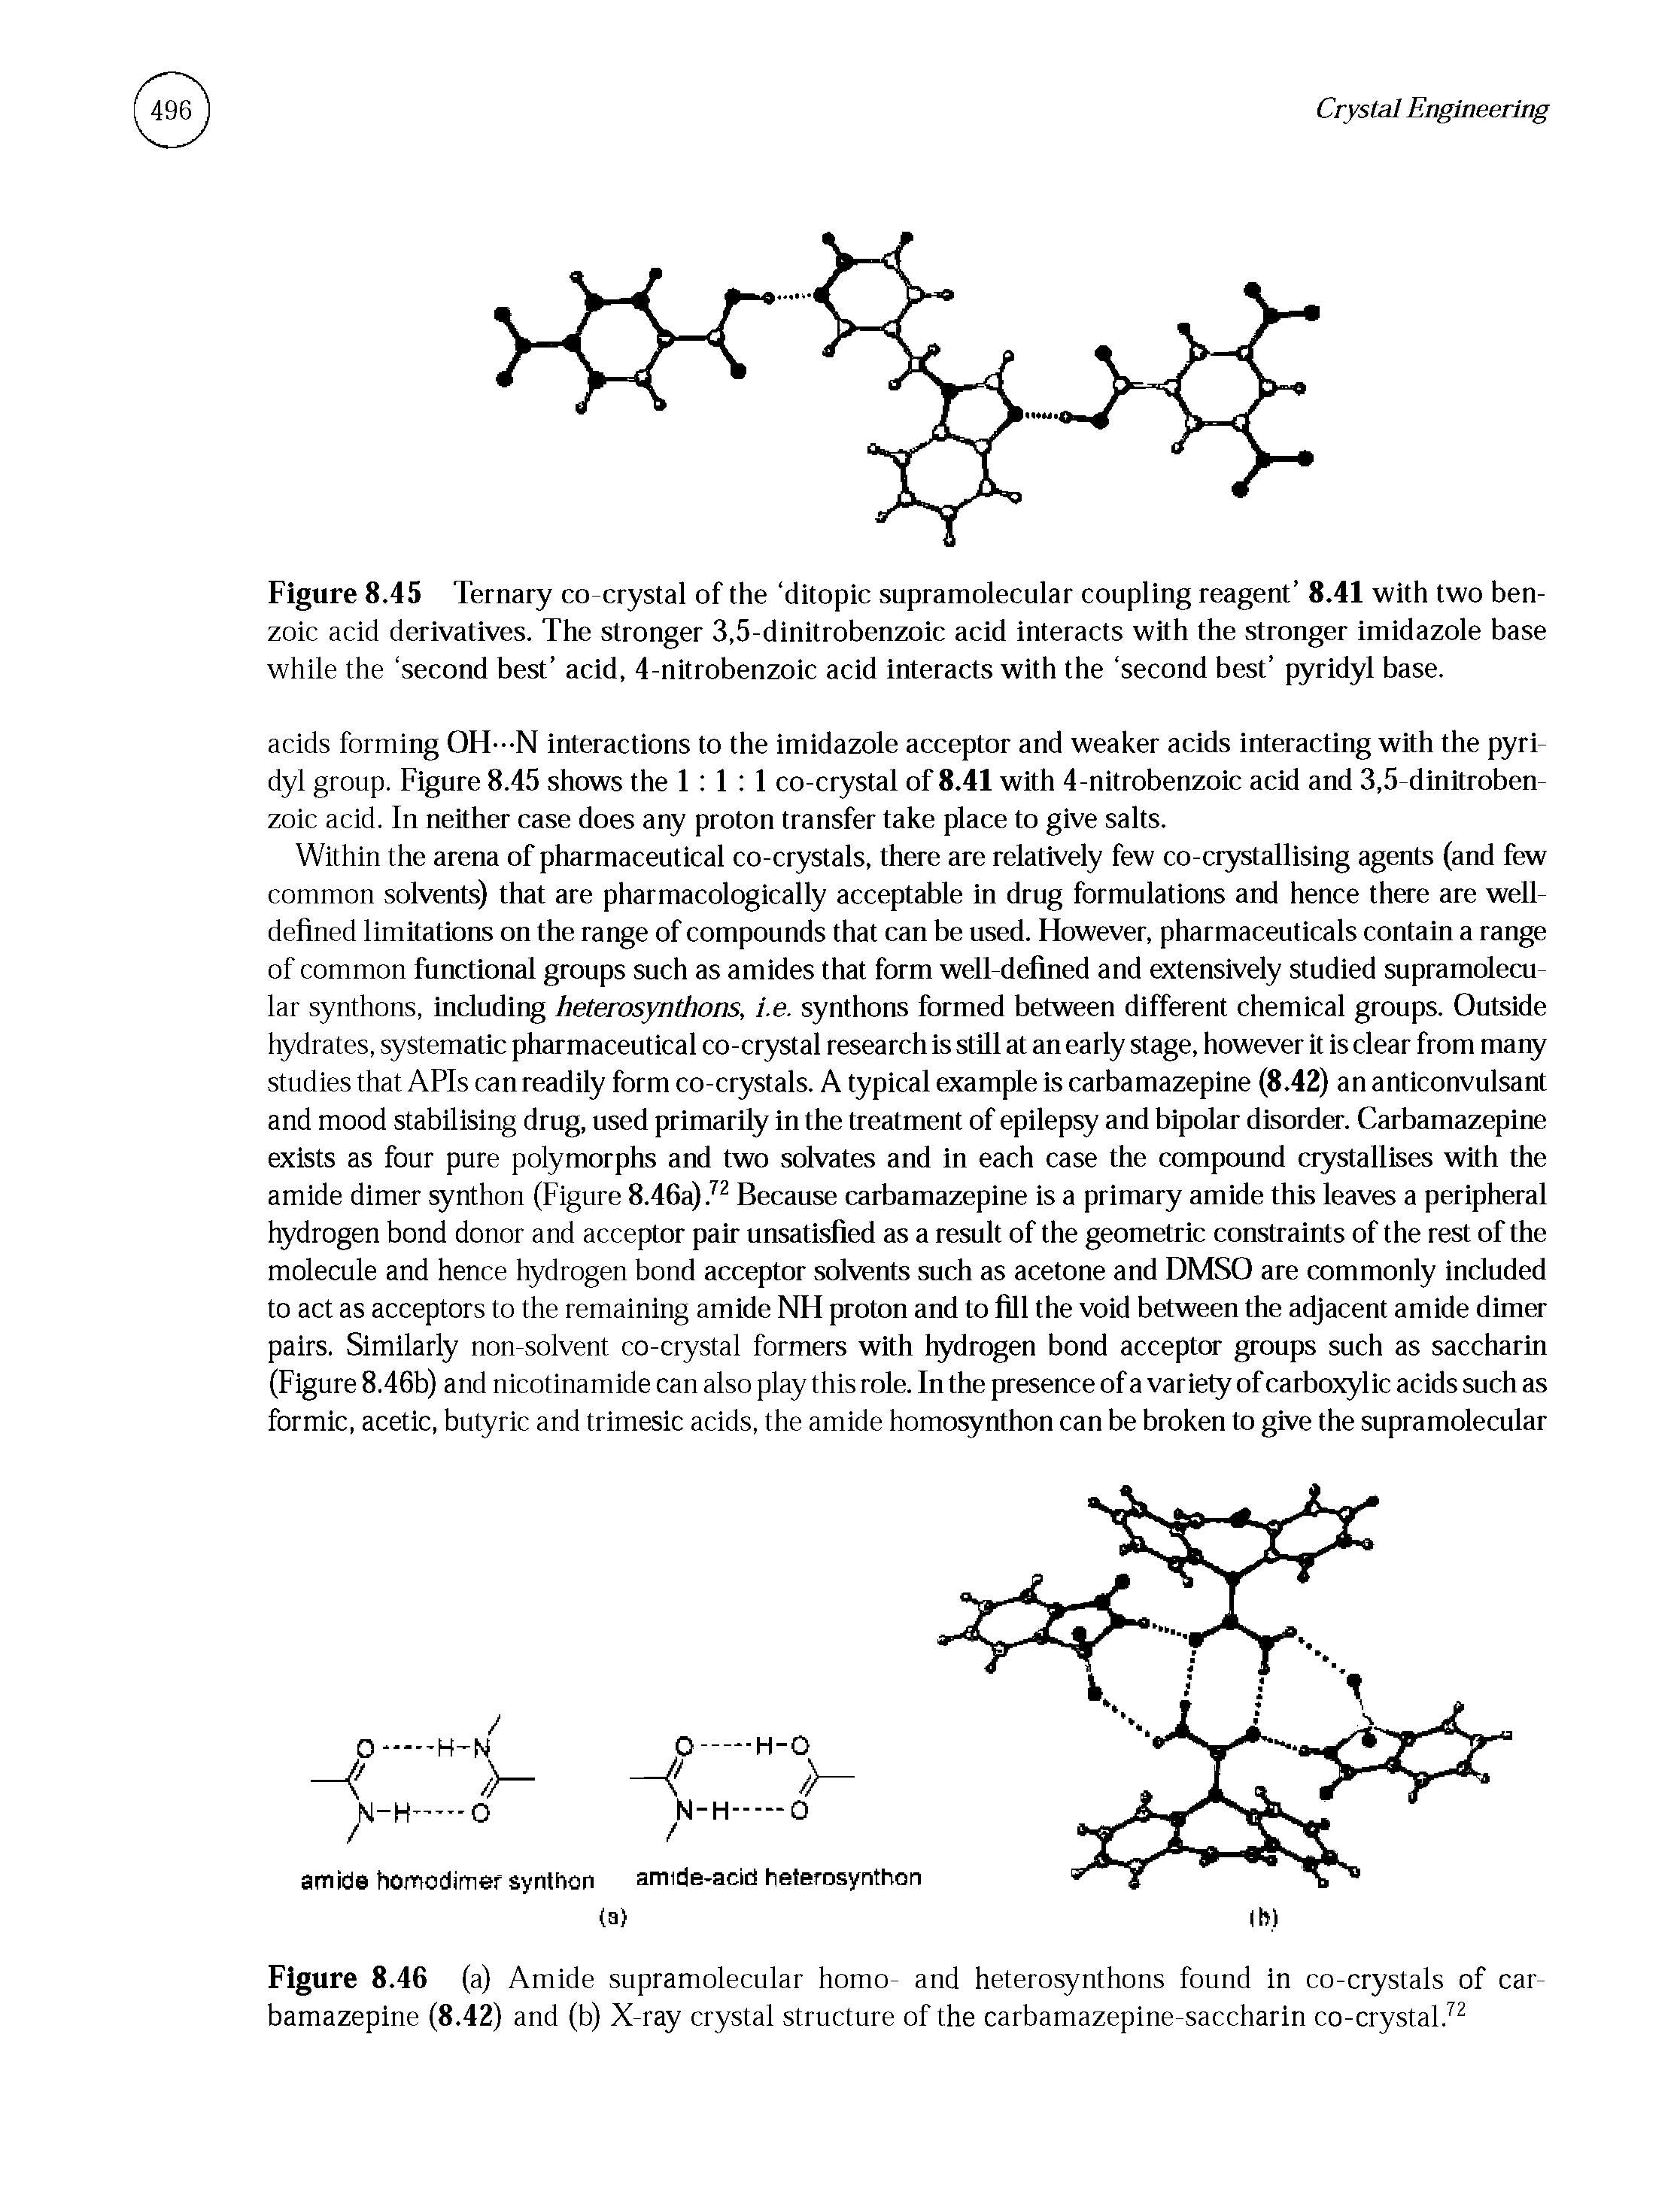 Figure 8.45 Ternary co-crystal of the ditopic supramolecular coupling reagent 8.41 with two benzoic acid derivatives. The stronger 3,5-dinitrobenzoic acid interacts with the stronger imidazole base while the second best acid, 4-nitrobenzoic acid interacts with the second best pyridyl base.